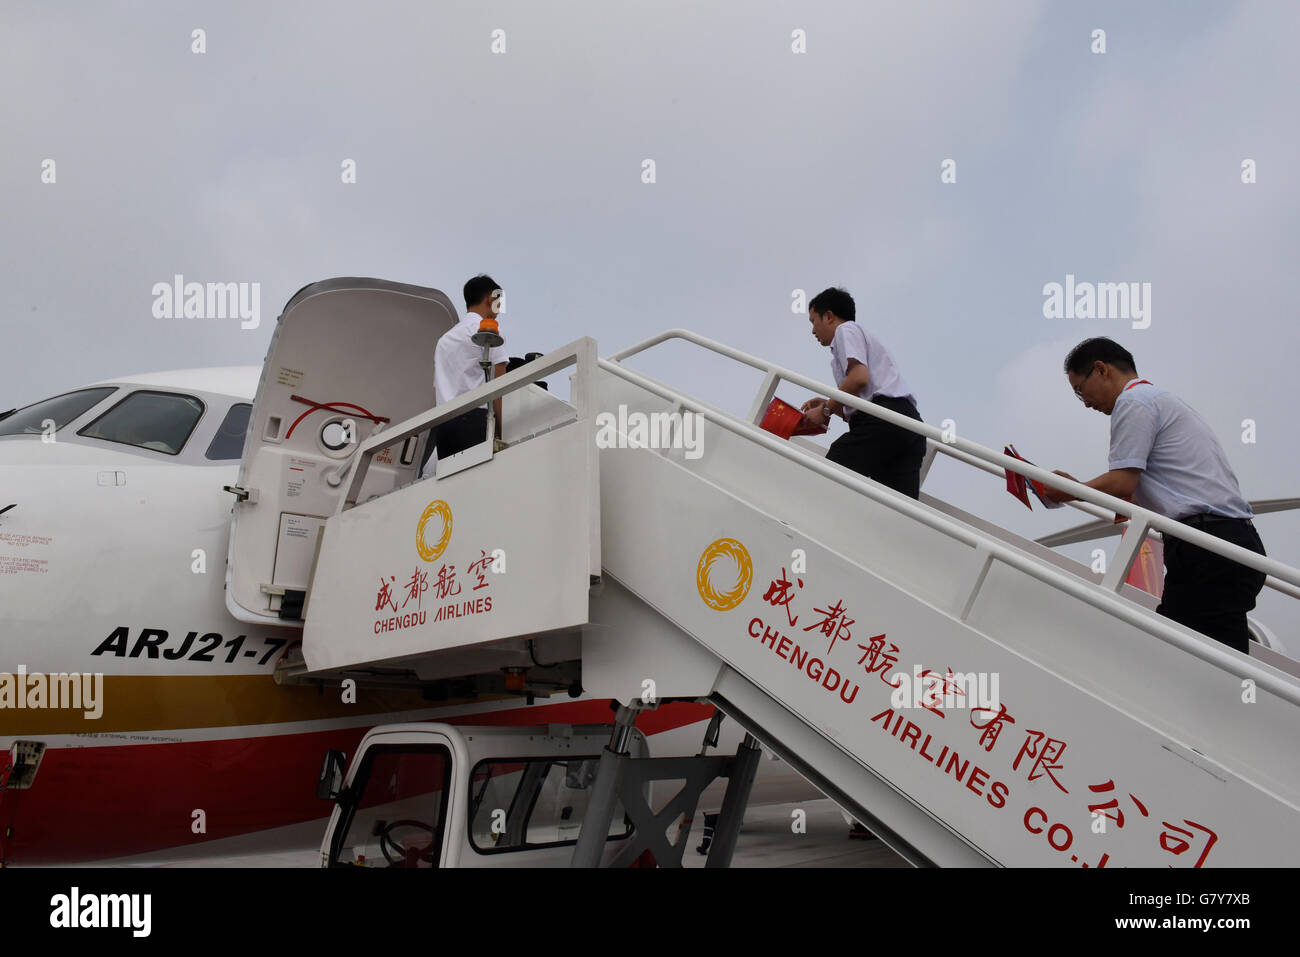 Chengdu, China's Sichuan Province. 28th June, 2016. Passengers board Chengdu Airlines ARJ21-700 at Shuangliu International Airport in Chengdu, capital of southwest China's Sichuan Province, June 28, 2016. ARJ21, manufactured by the Commercial Aircraft Corp. of China (COMAC), made its maiden commercial flight from Chengdu to Shanghai Tuesday. The domestically-designed airliner is China's first regional jet manufactured according to international standards. © Liu Kun/Xinhua/Alamy Live News Stock Photo